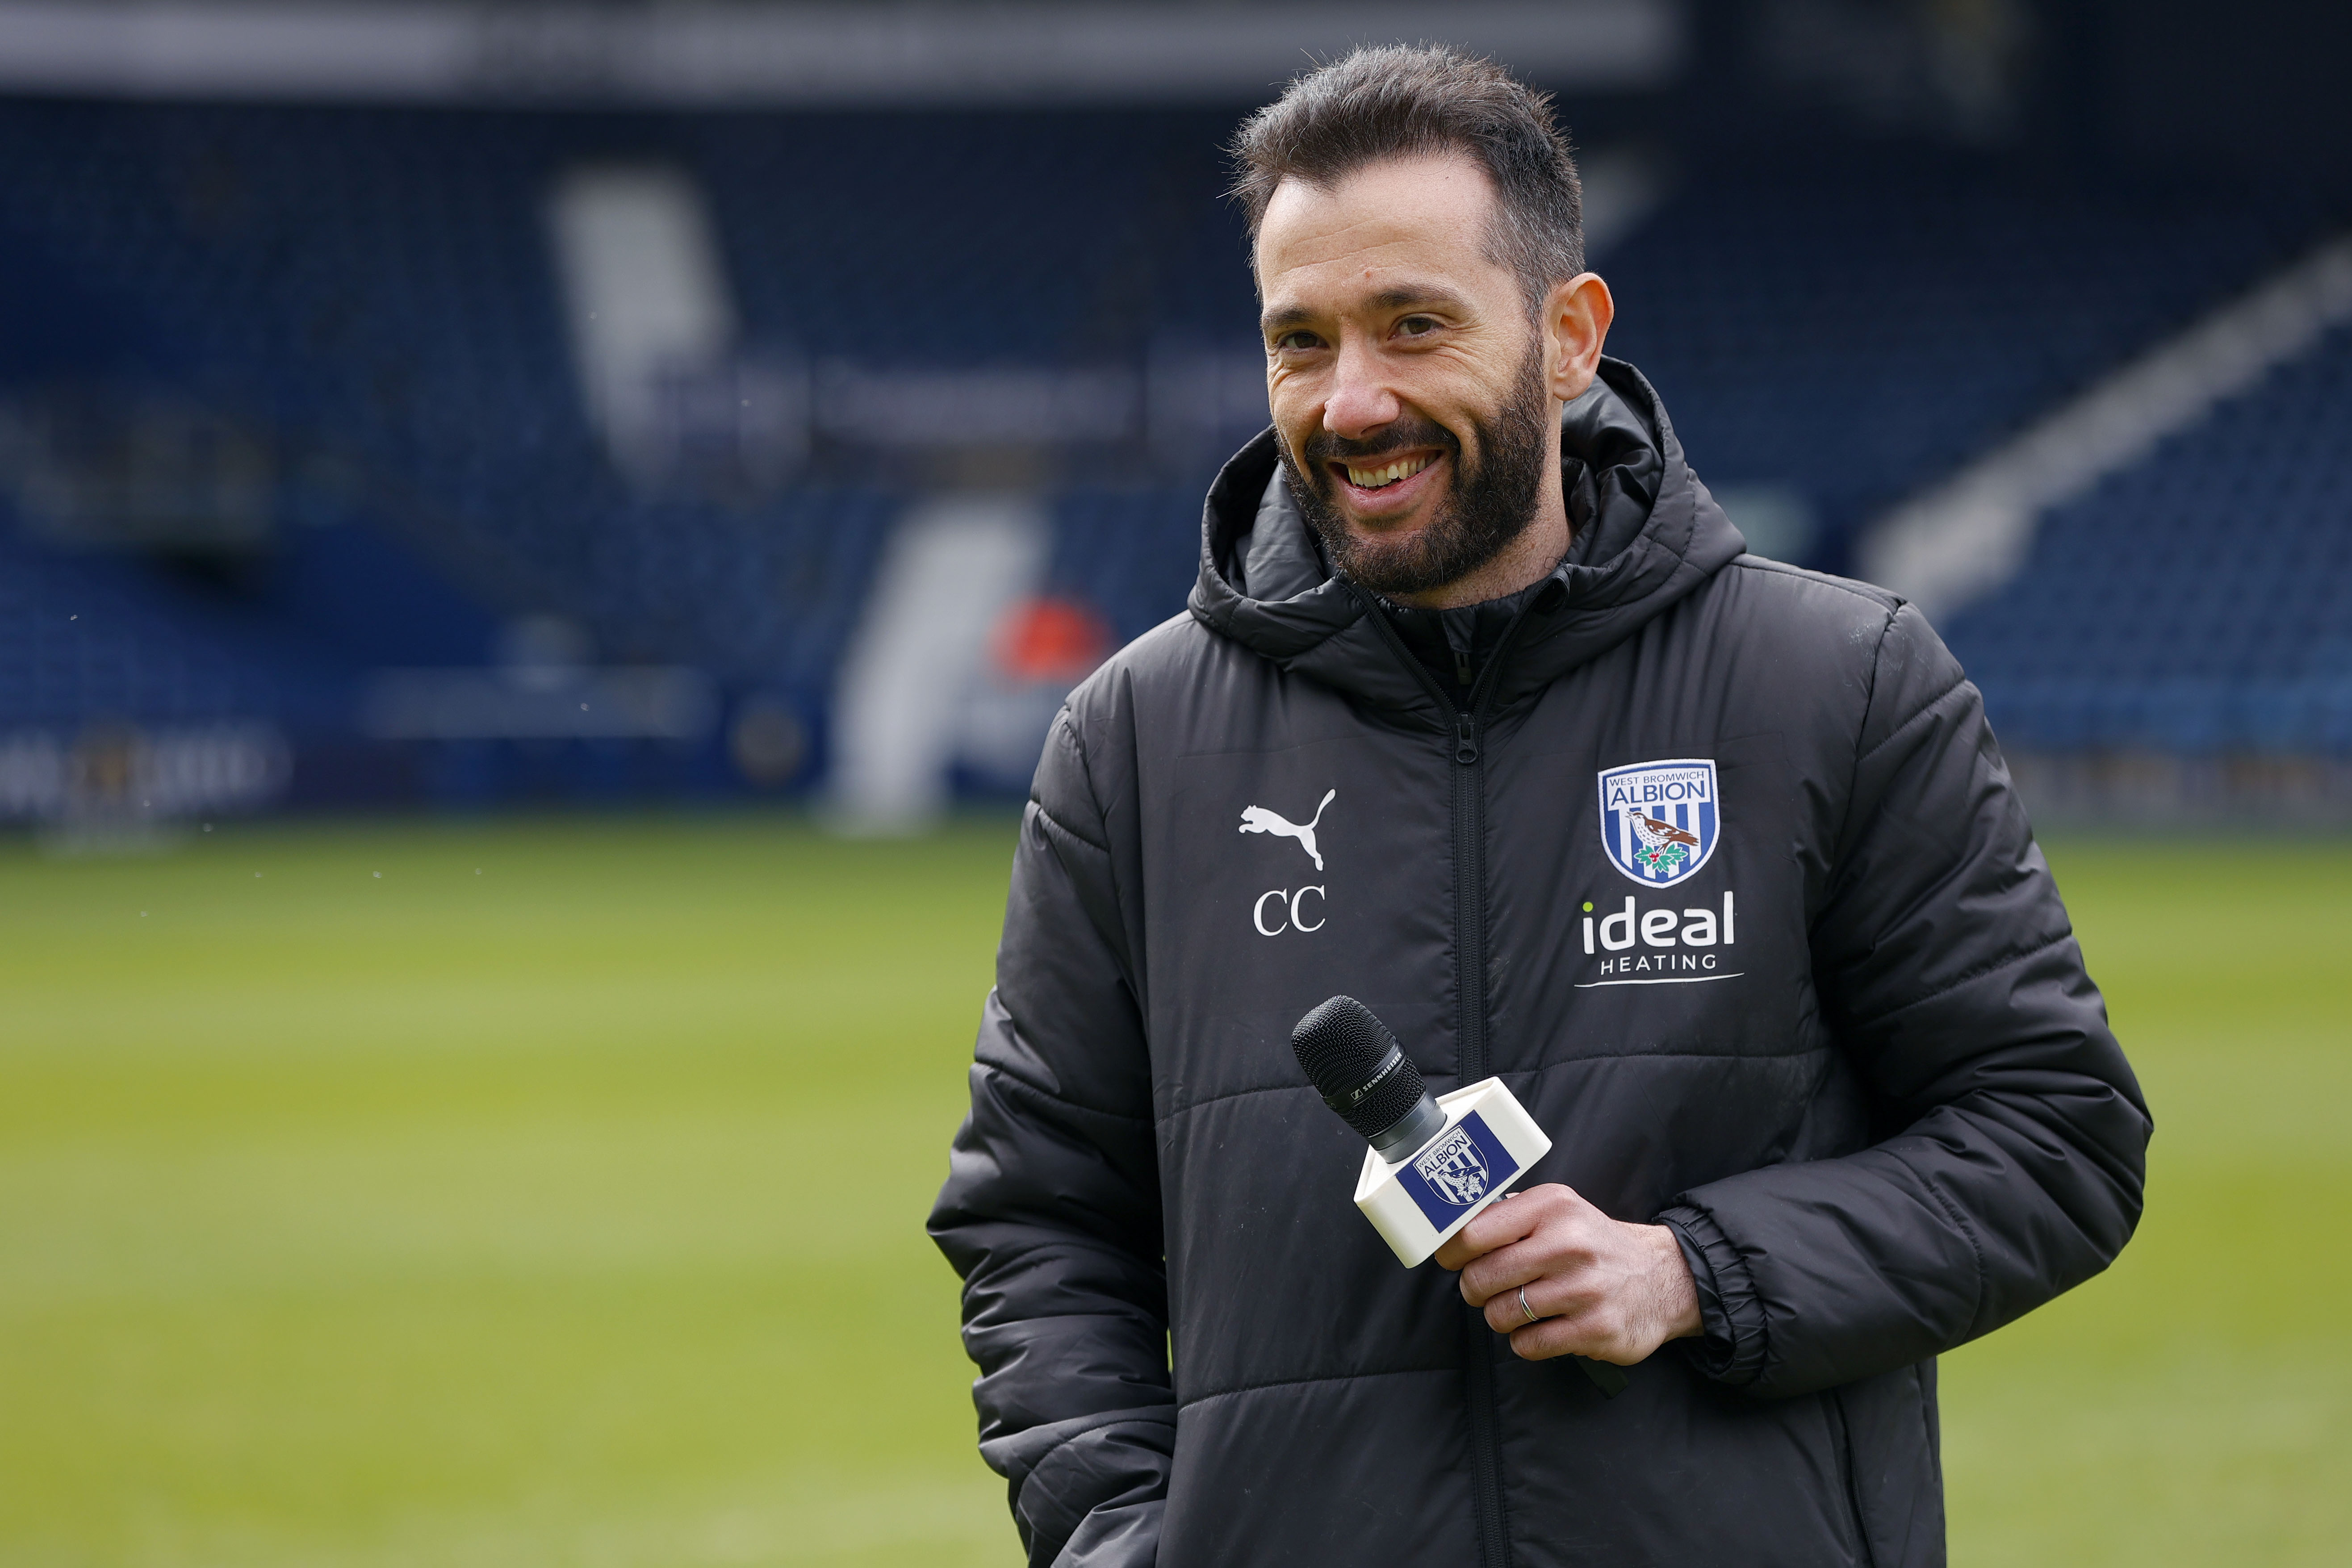 Carlos Corberán holding a mic talking to supporters at The Hawthorns